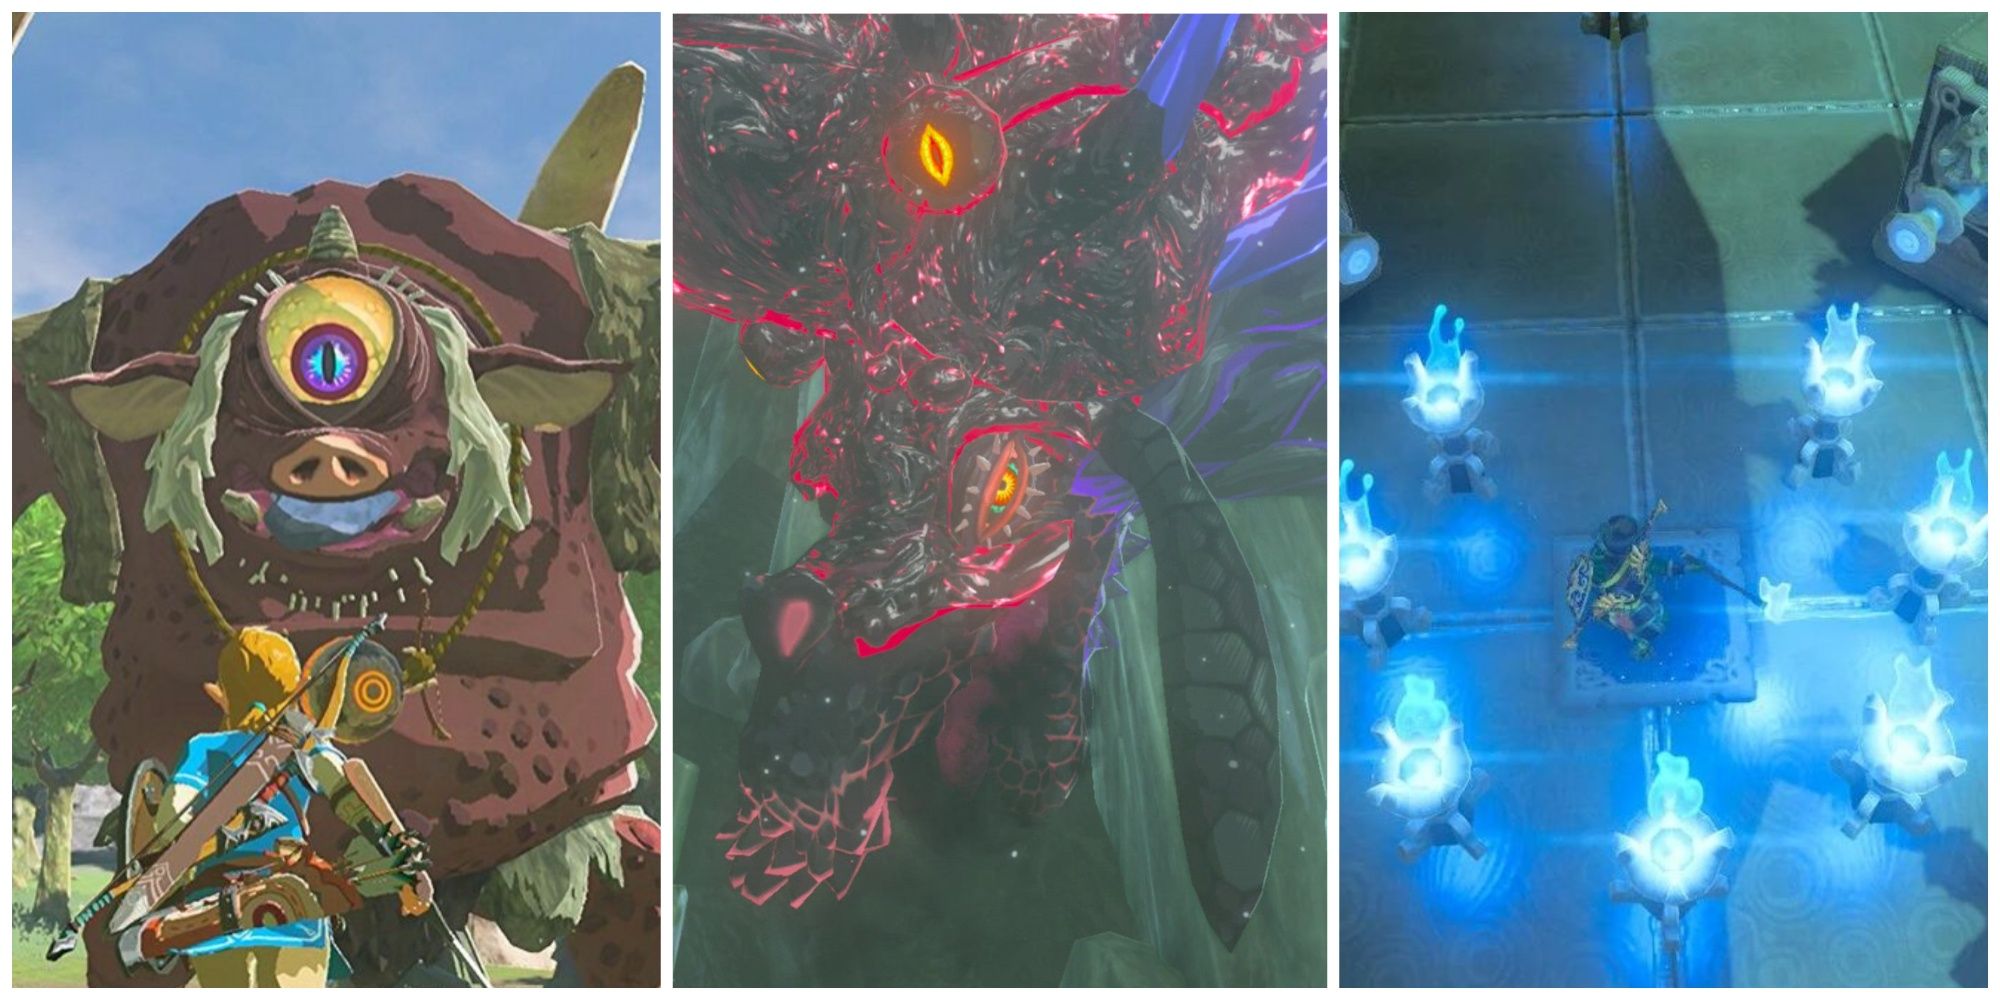 Link battling a Hinox, Naydra covered by malice, and Link lighting braziers with Blue Flame